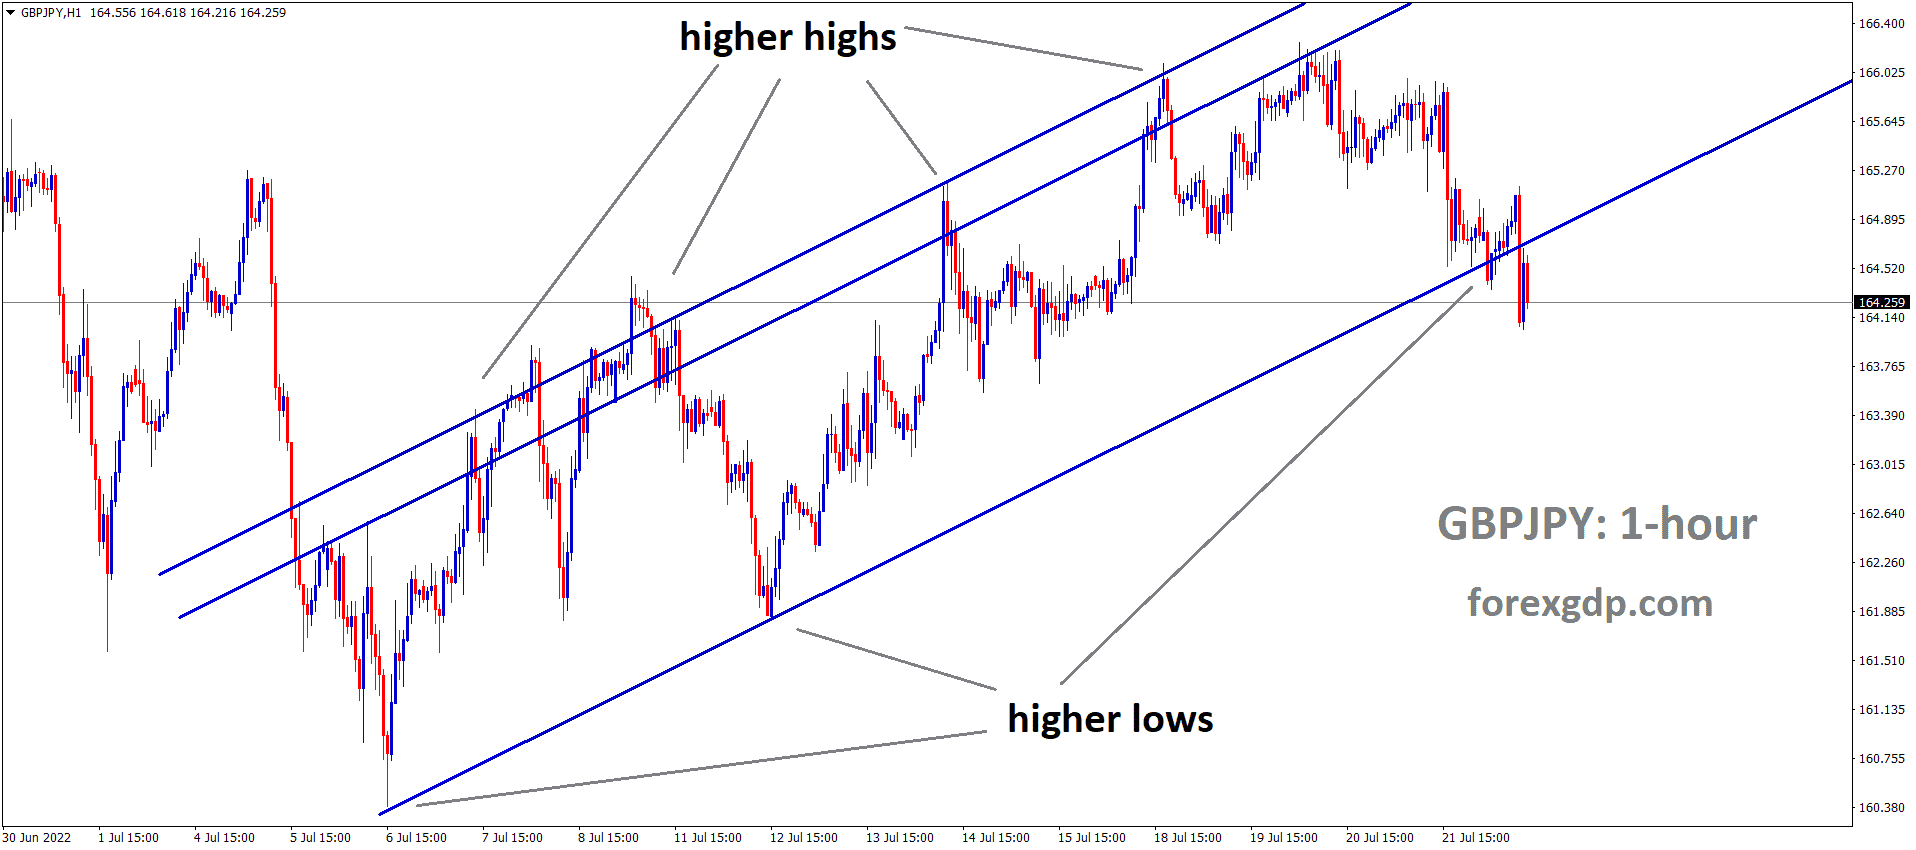 GBPJPY is moving in an Ascending channel and the market has reached the higher low area of the channel